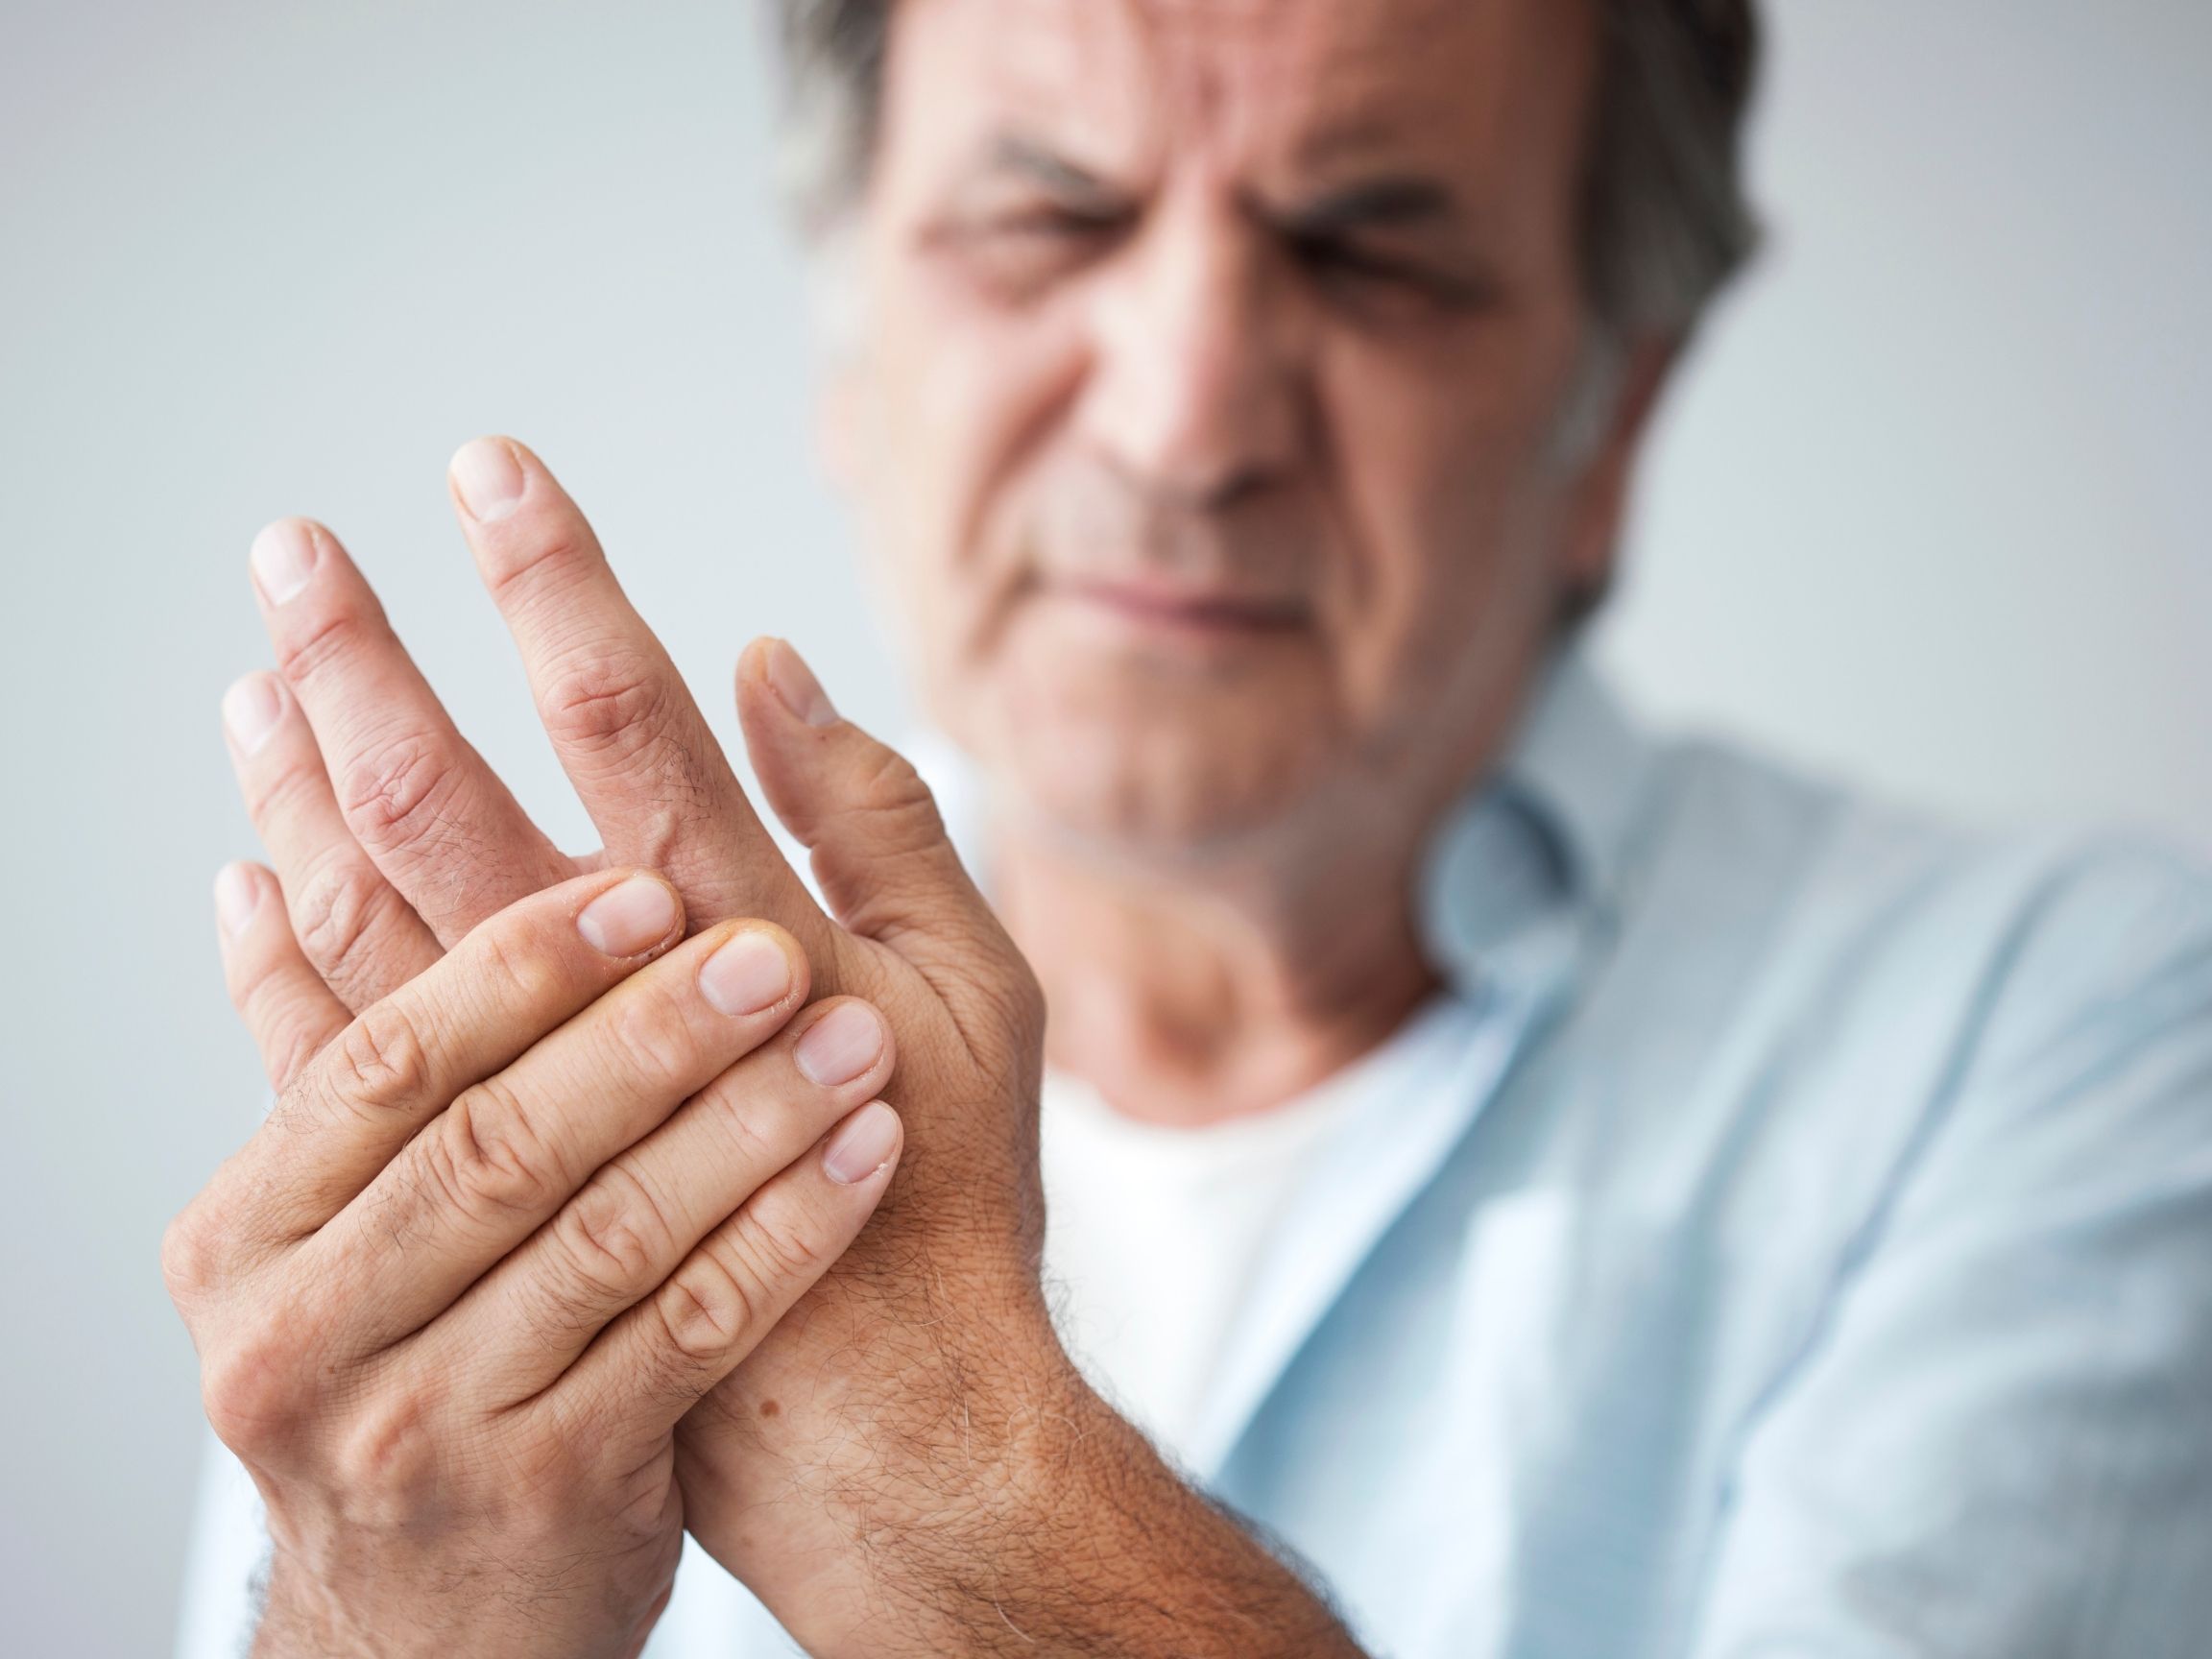 Learn the types of arthritis here